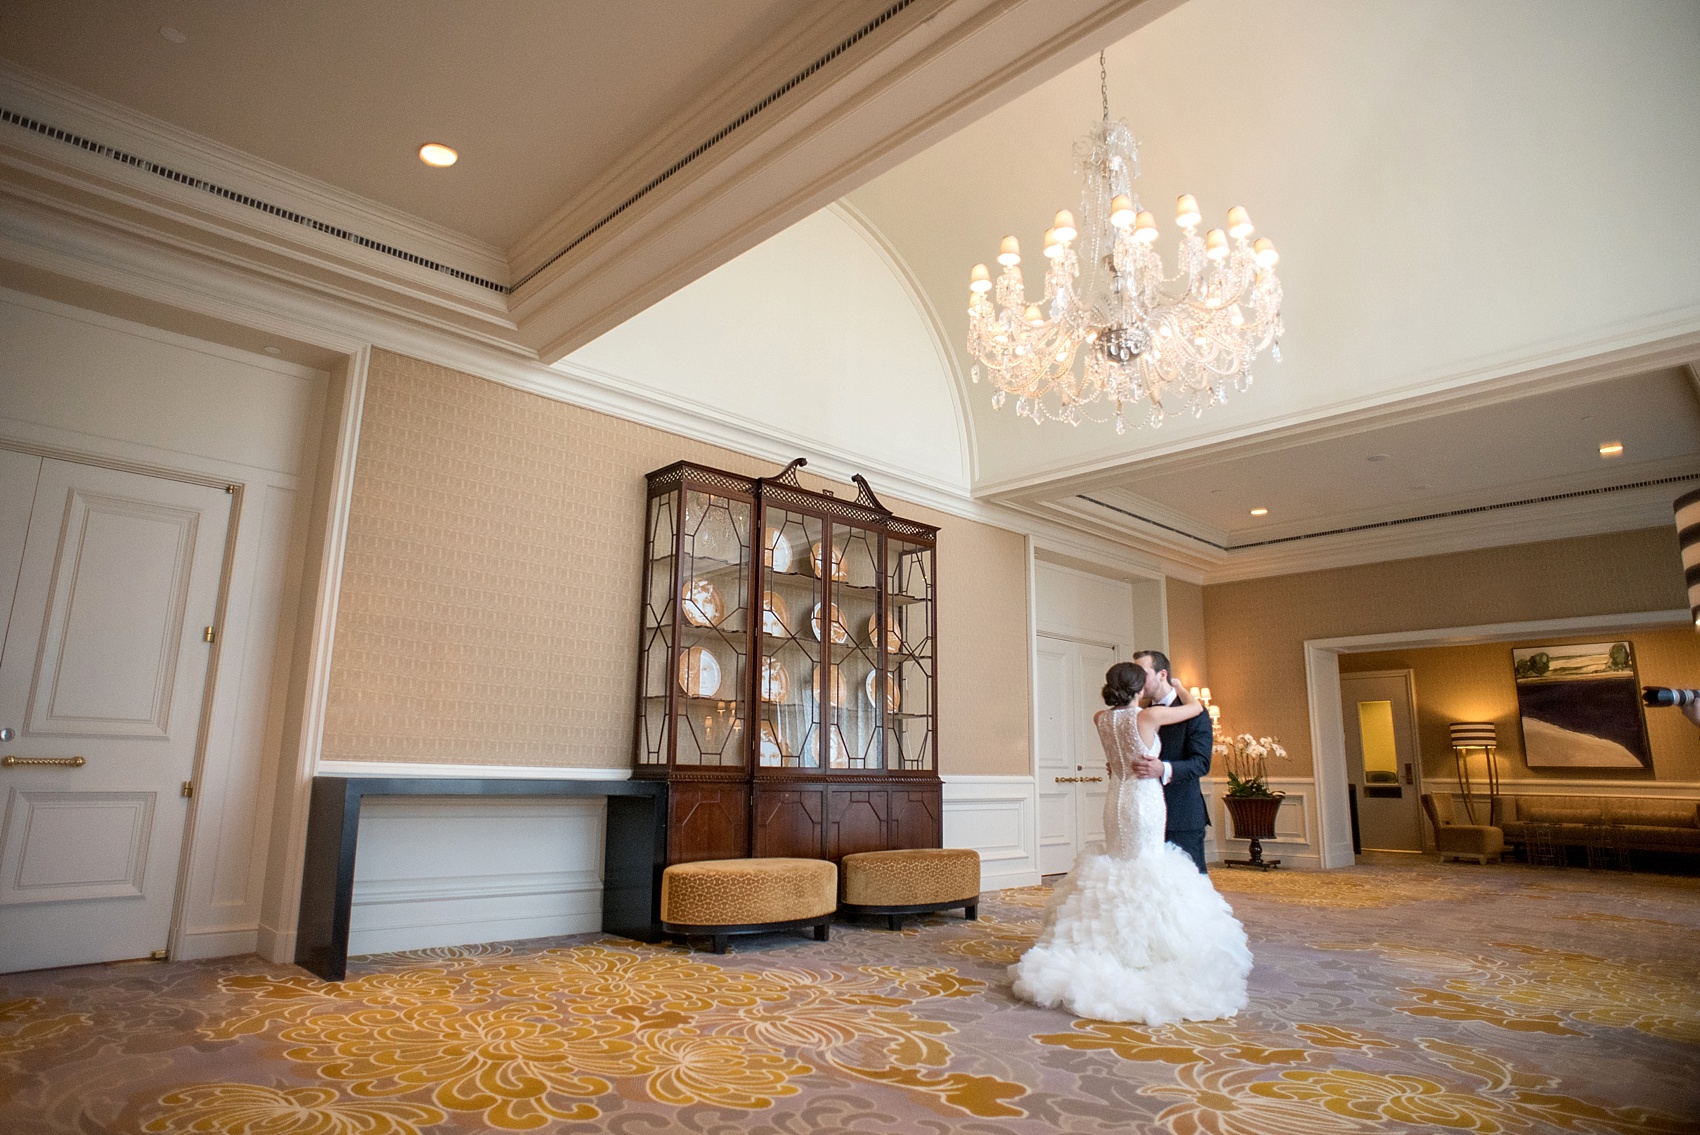 Washington, DC wedding photos by Mikkel Paige. The bride and groom's first look at The Ritz Carlton, Pentagon City.